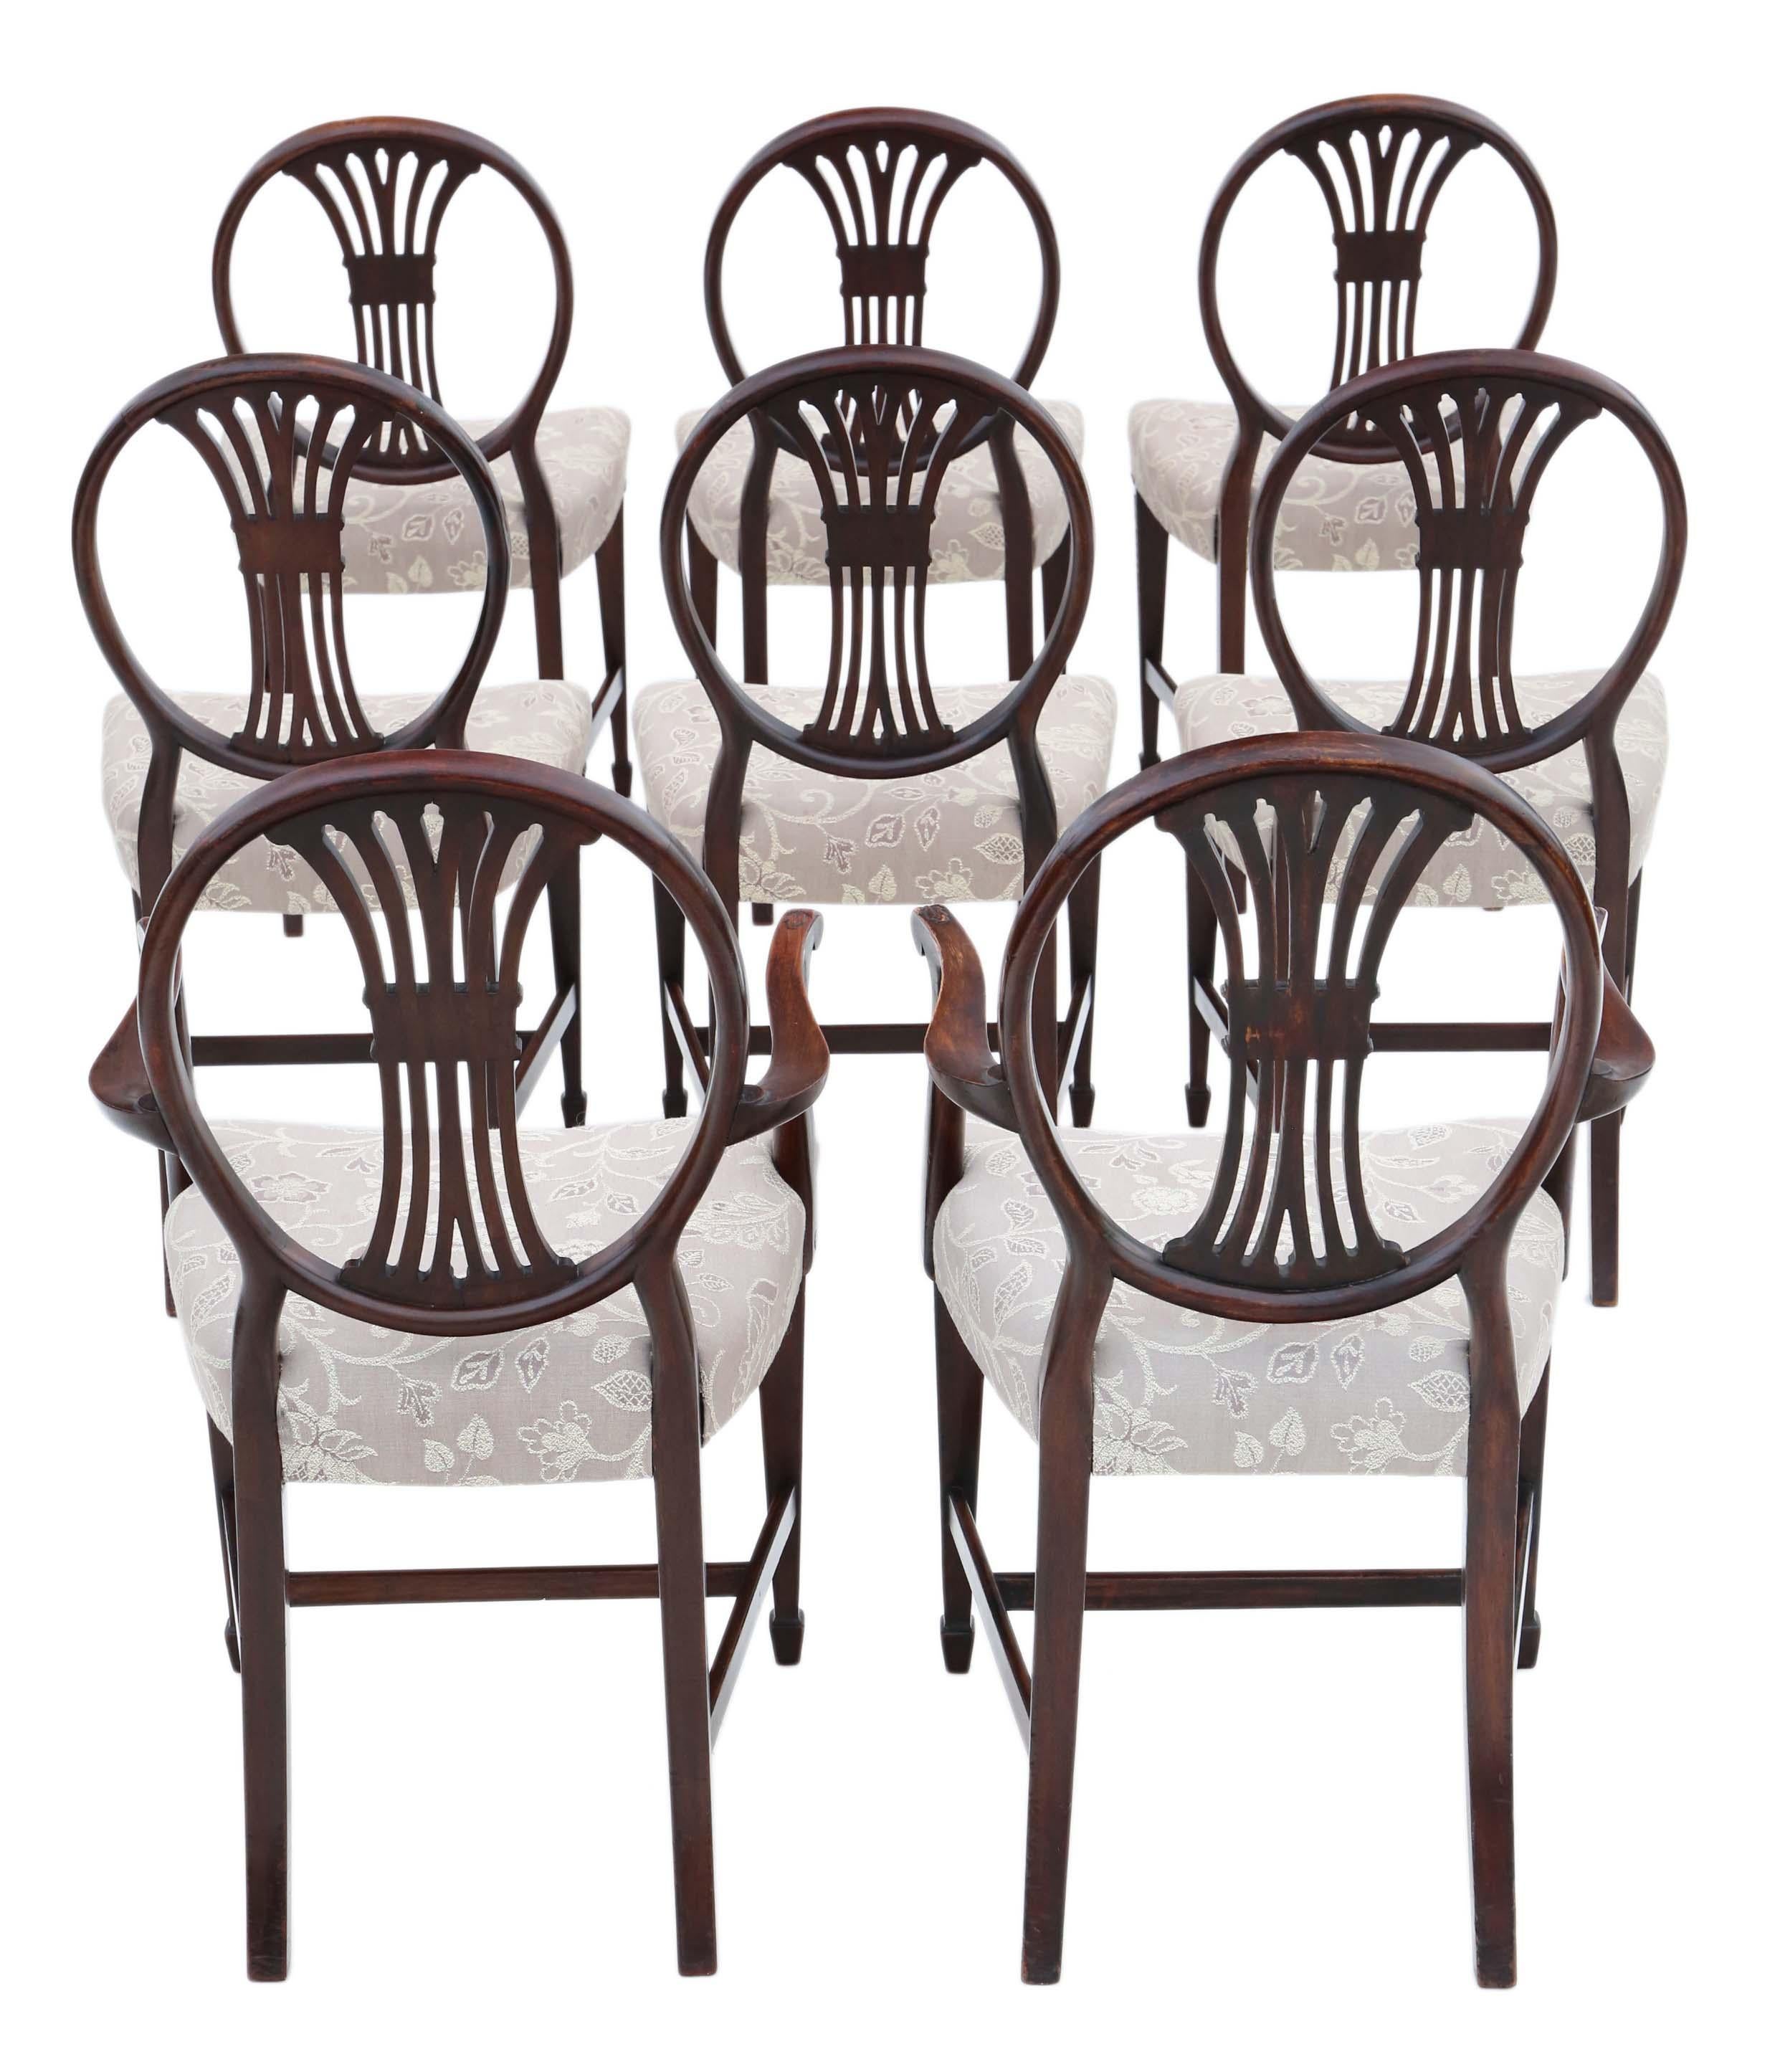 Antique fine quality set of 8 (6+2) carved mahogany dining chairs late 19th century, Hepplewhite revival.

No loose joints or woodworm.

The upholstery is in good condition (but not new) with no major marks or wear. We are happy to install your